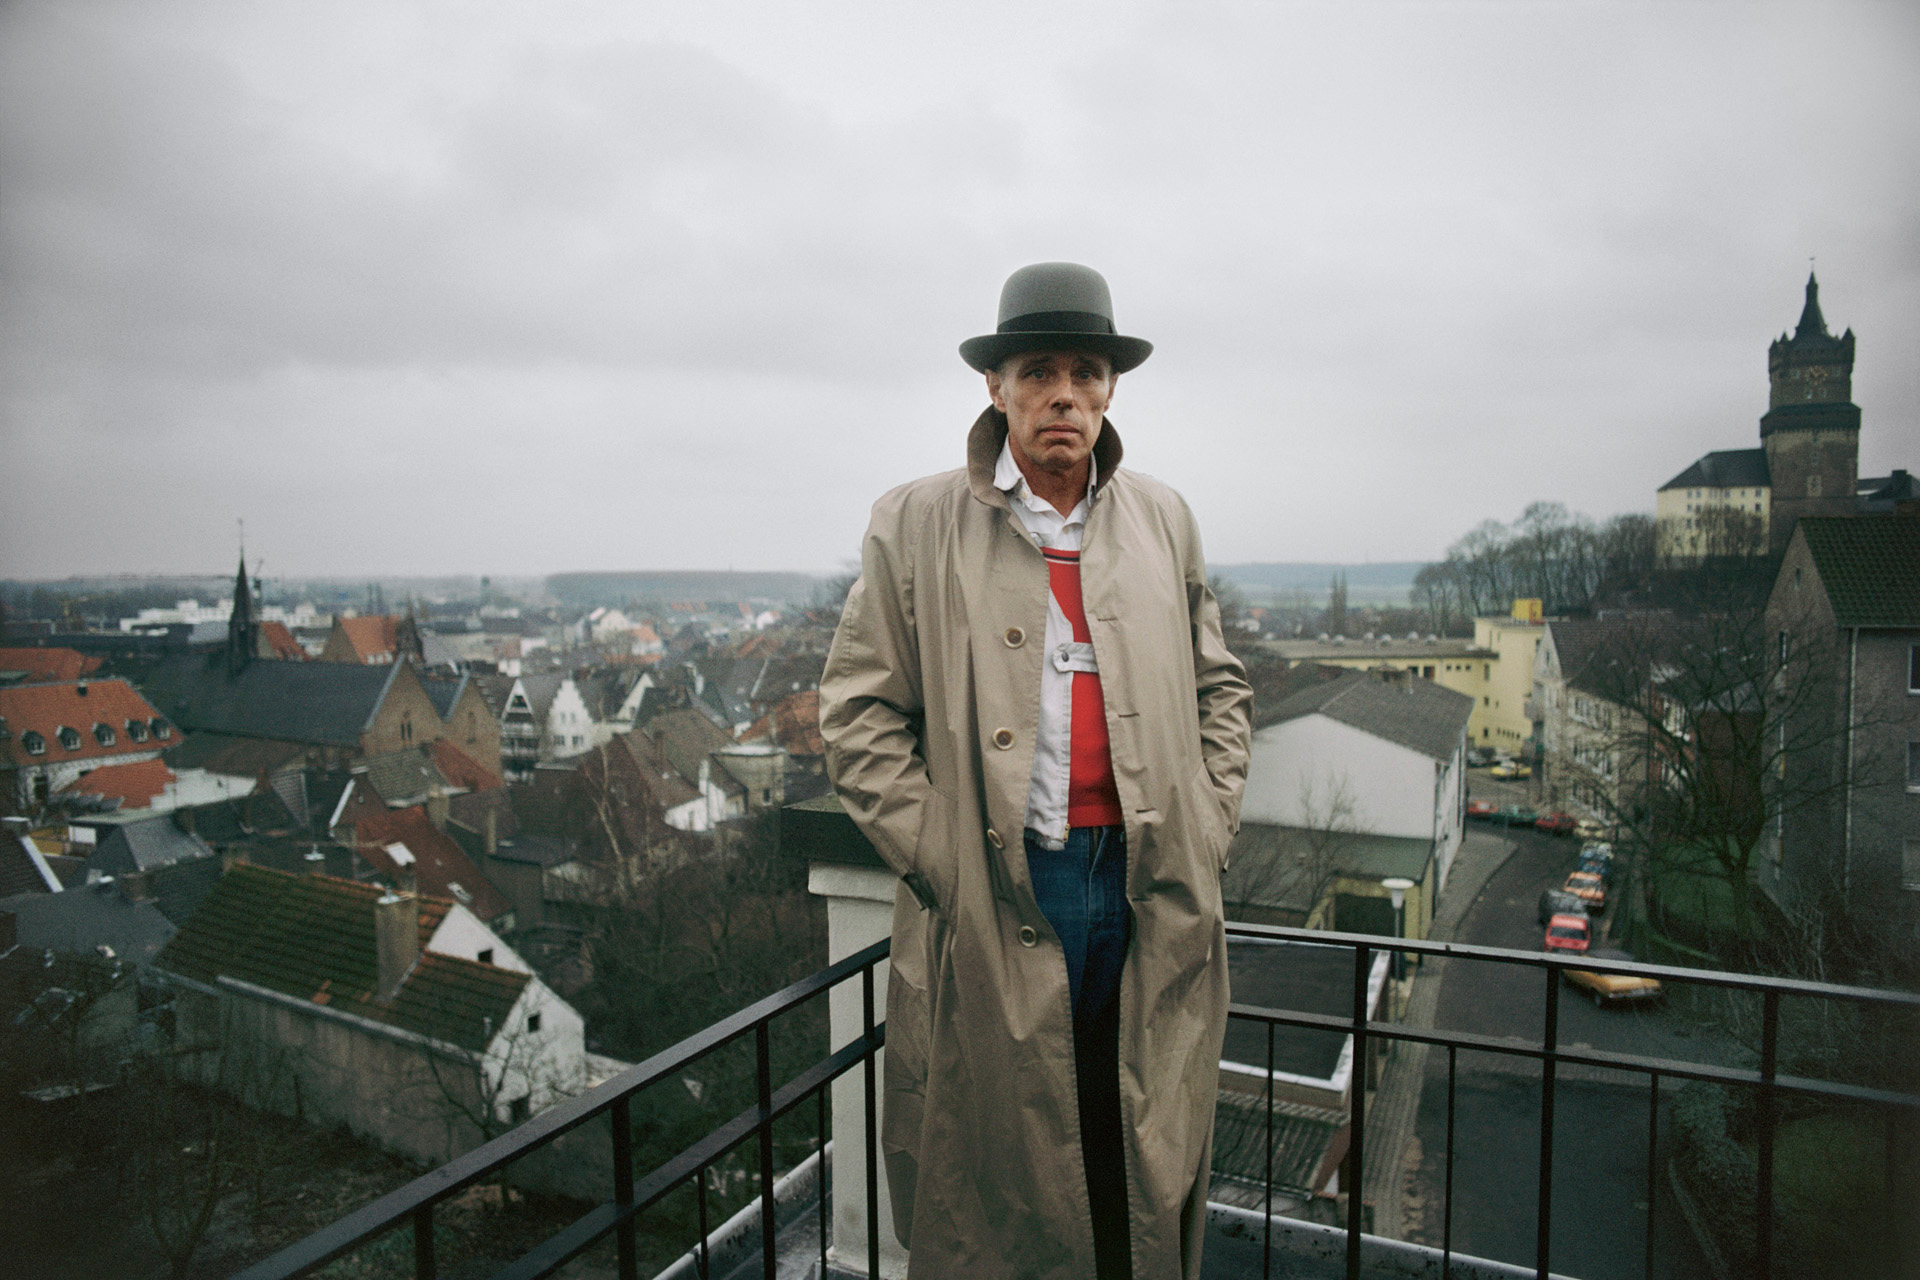  Joseph Beuys on the roof of Hanns Lamers’ tower at the Koekkoek Belvedere 